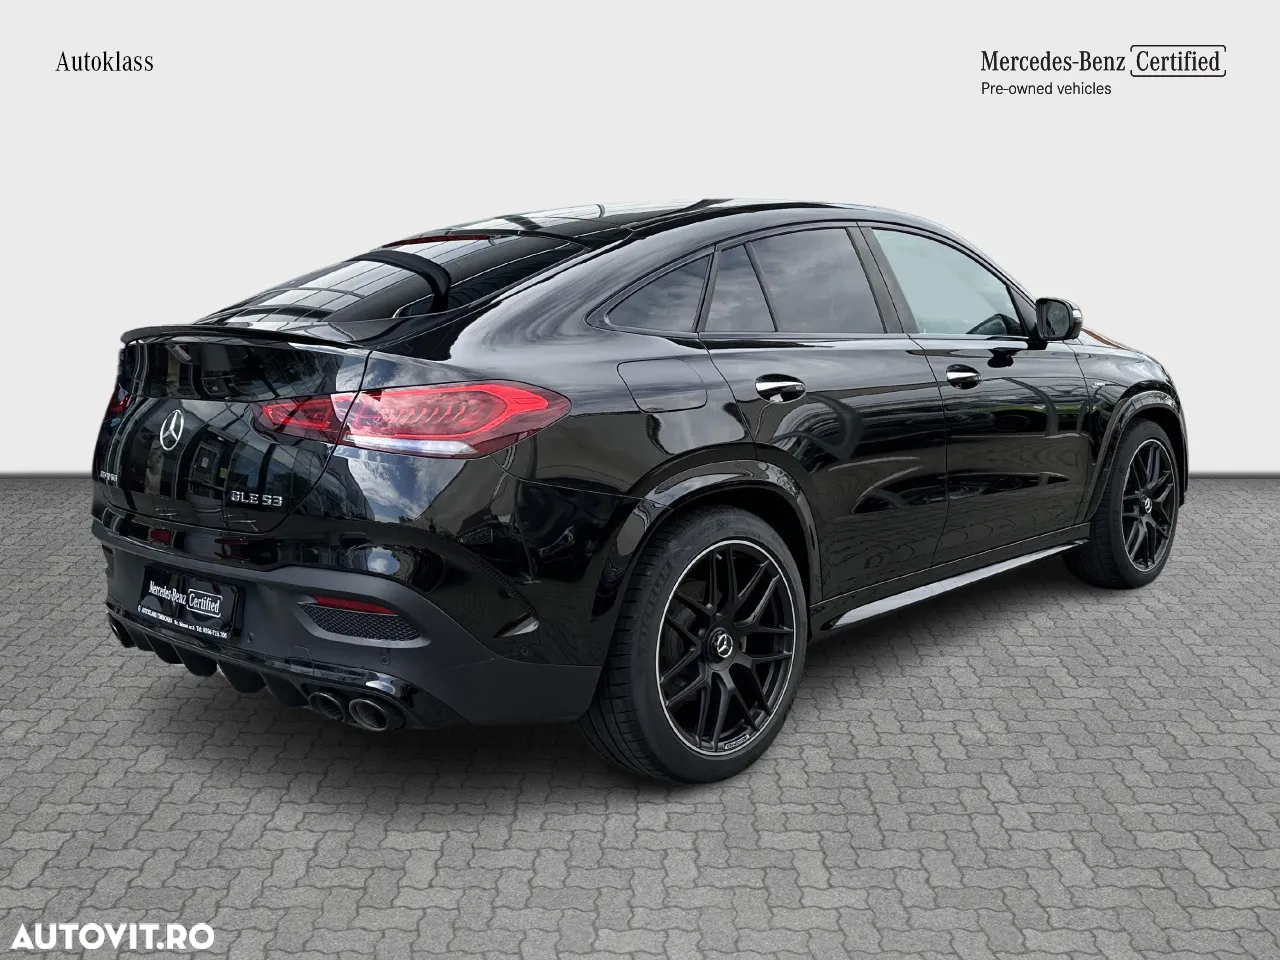 Mercedes-Benz GLE Coupe AMG 53 MHEV 4MATIC+ - 6